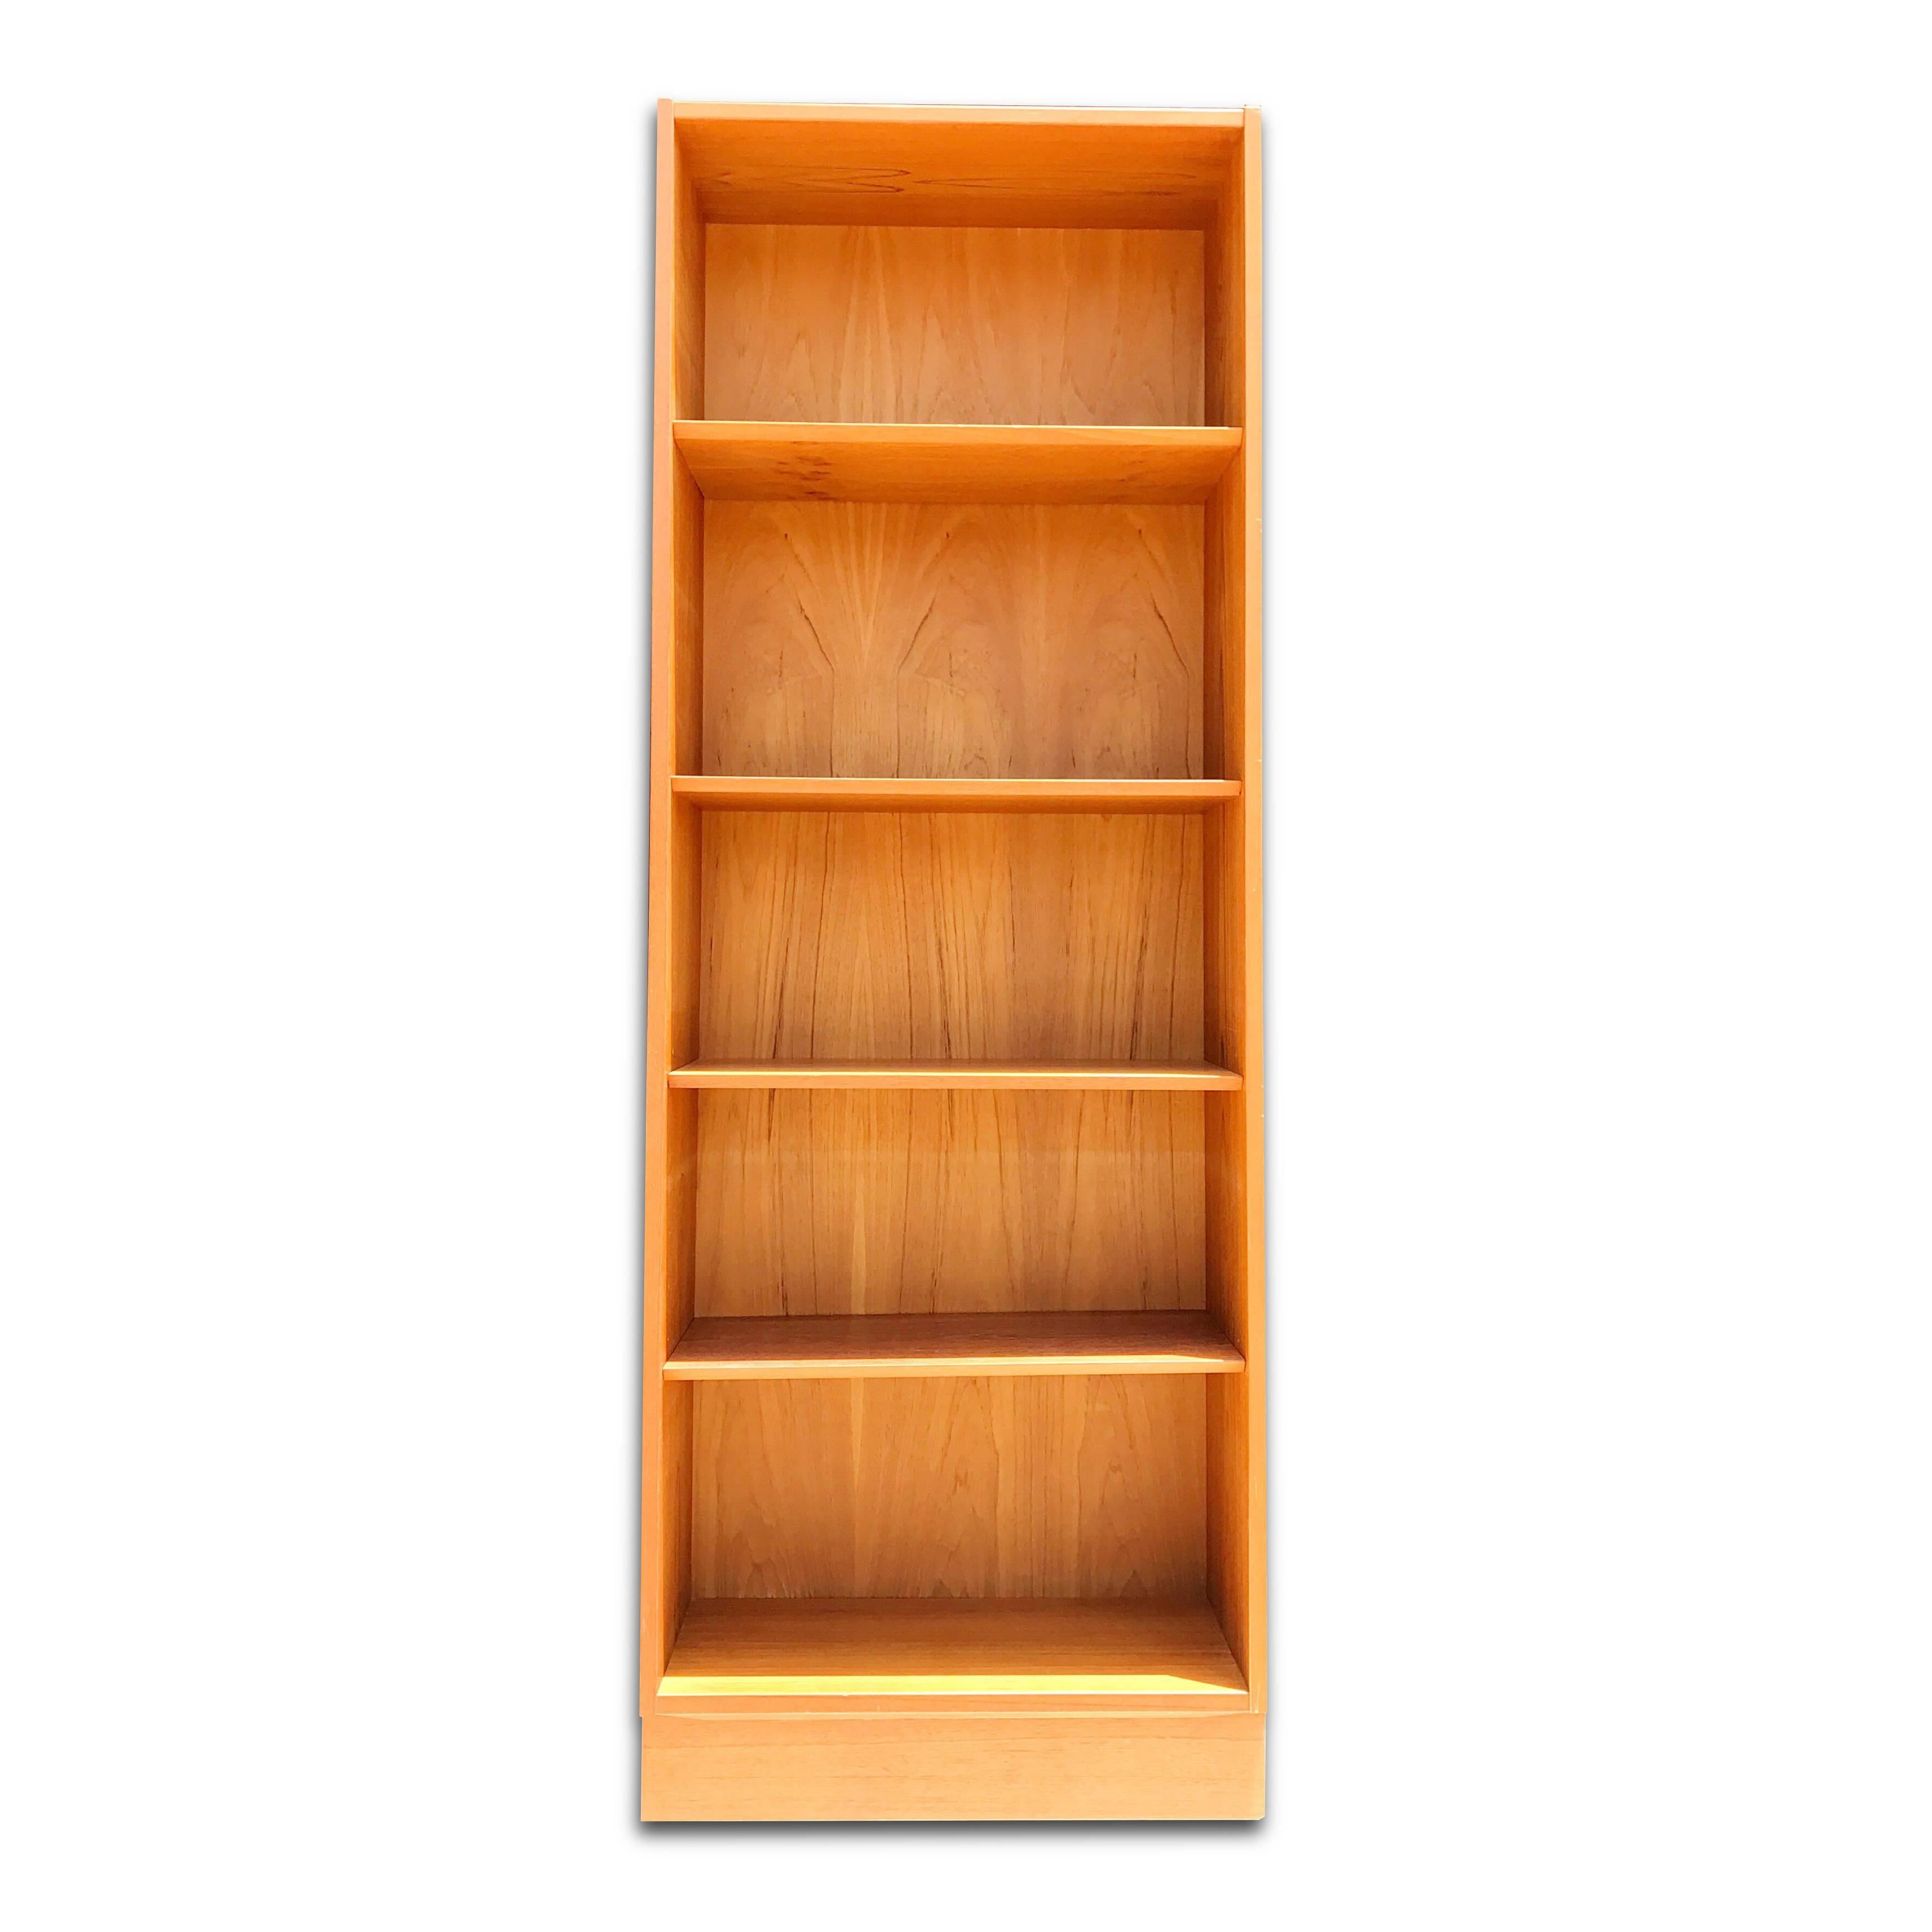 Six Poul Hundevad teak bookcases each displaying unique and beautiful grain patterns. Each of these pieces includes four adjustable shelves and bares the original Hundevad manufacturing label or stamp, confirming the Danish origin.

The clean,